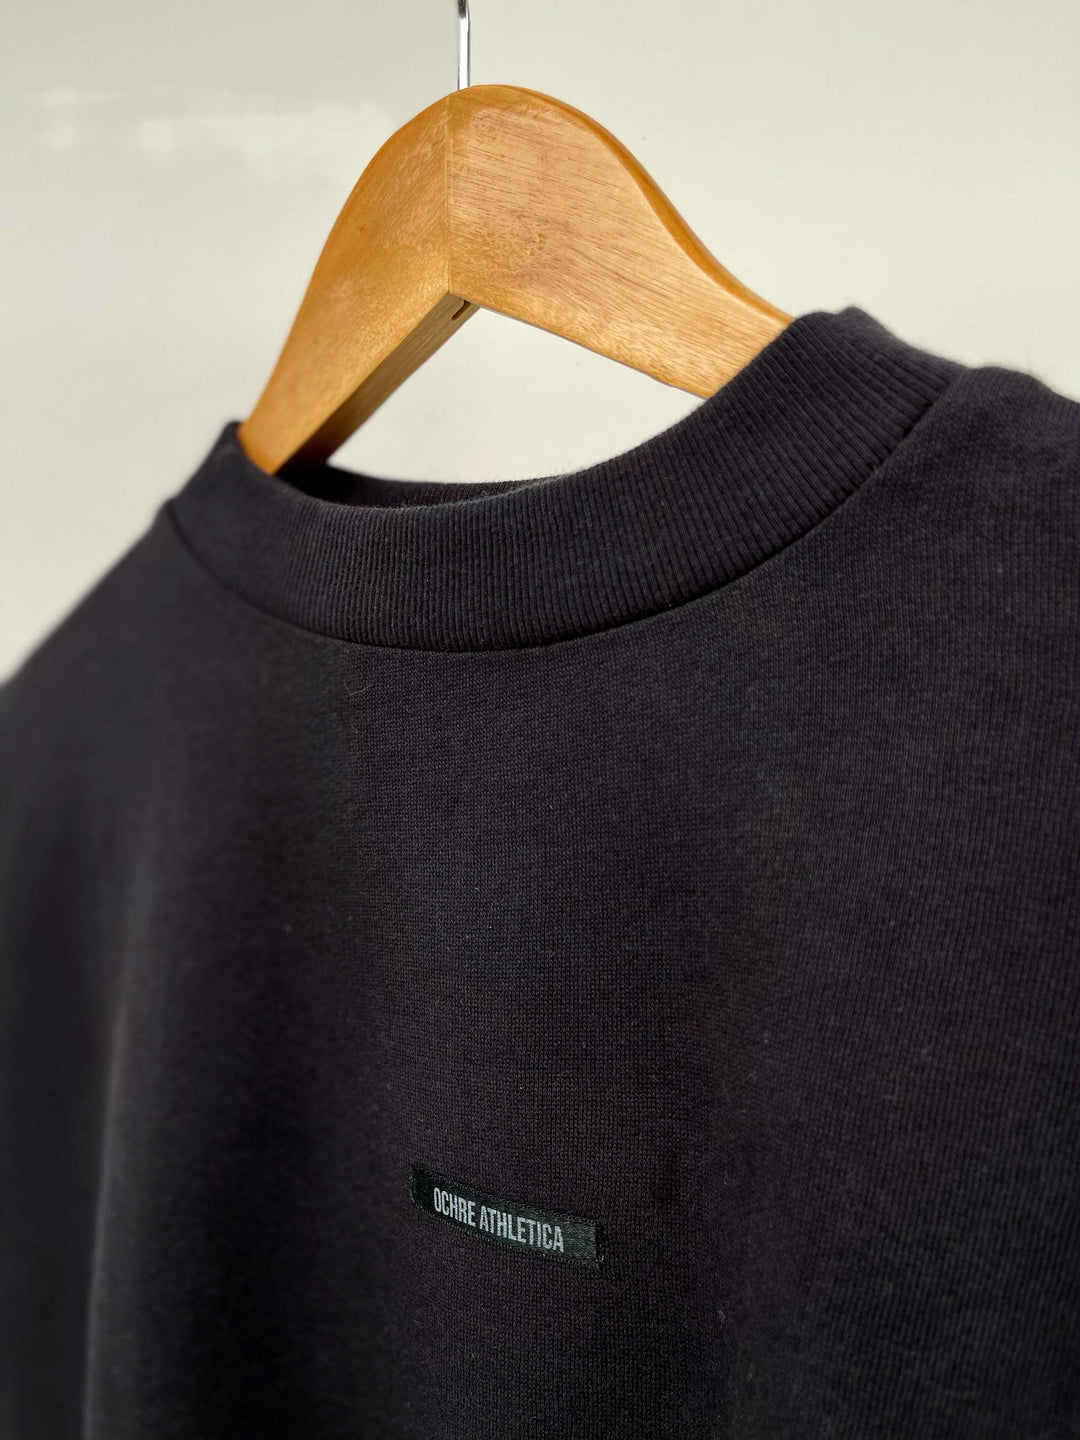 After Hours Sweatshirt in Charcoal